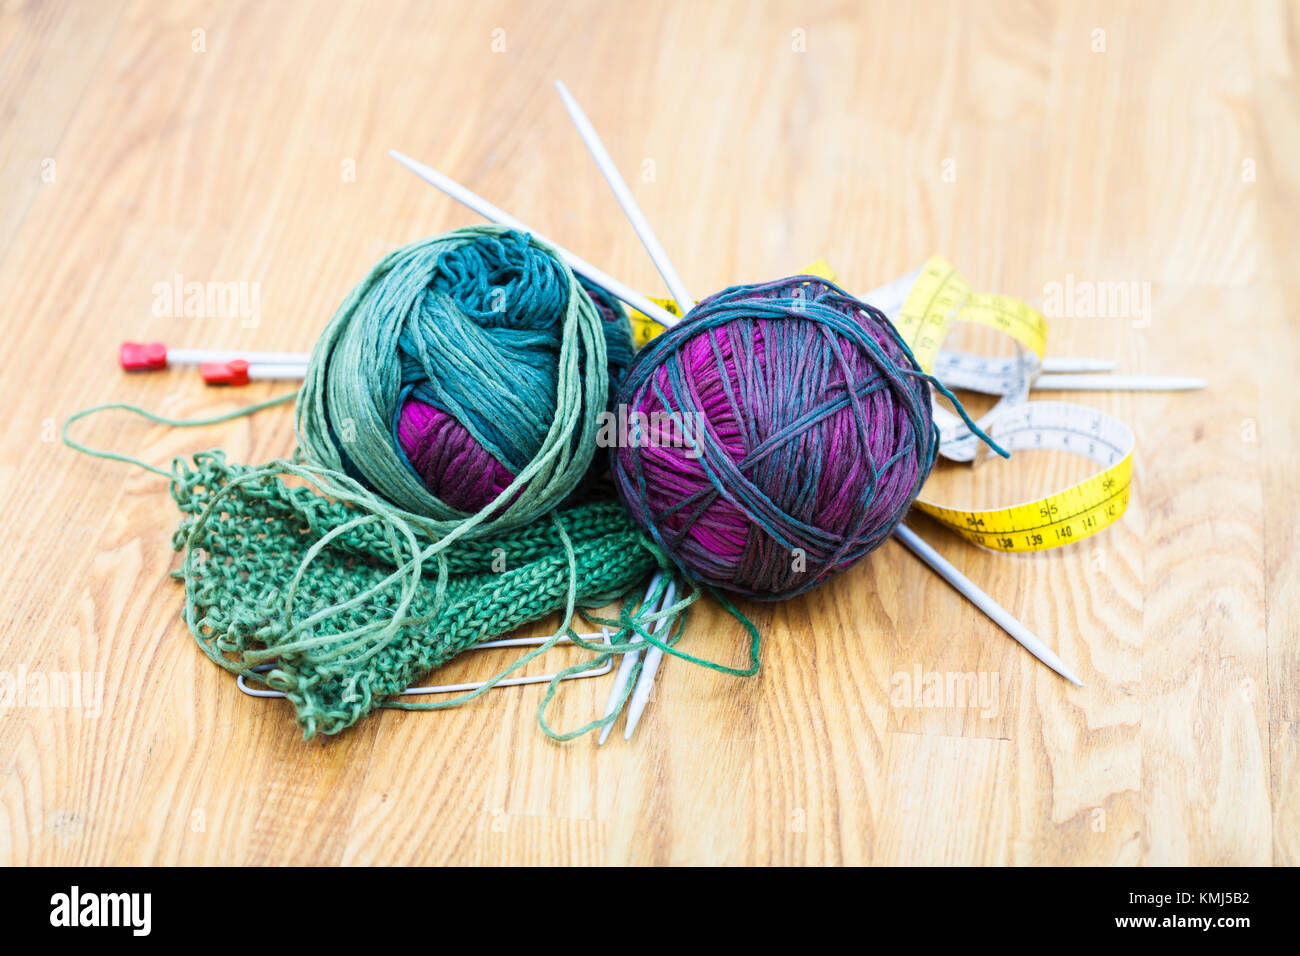 needlework still life - hand knitting tools and wool yarns on wooden table  Stock Photo - Alamy